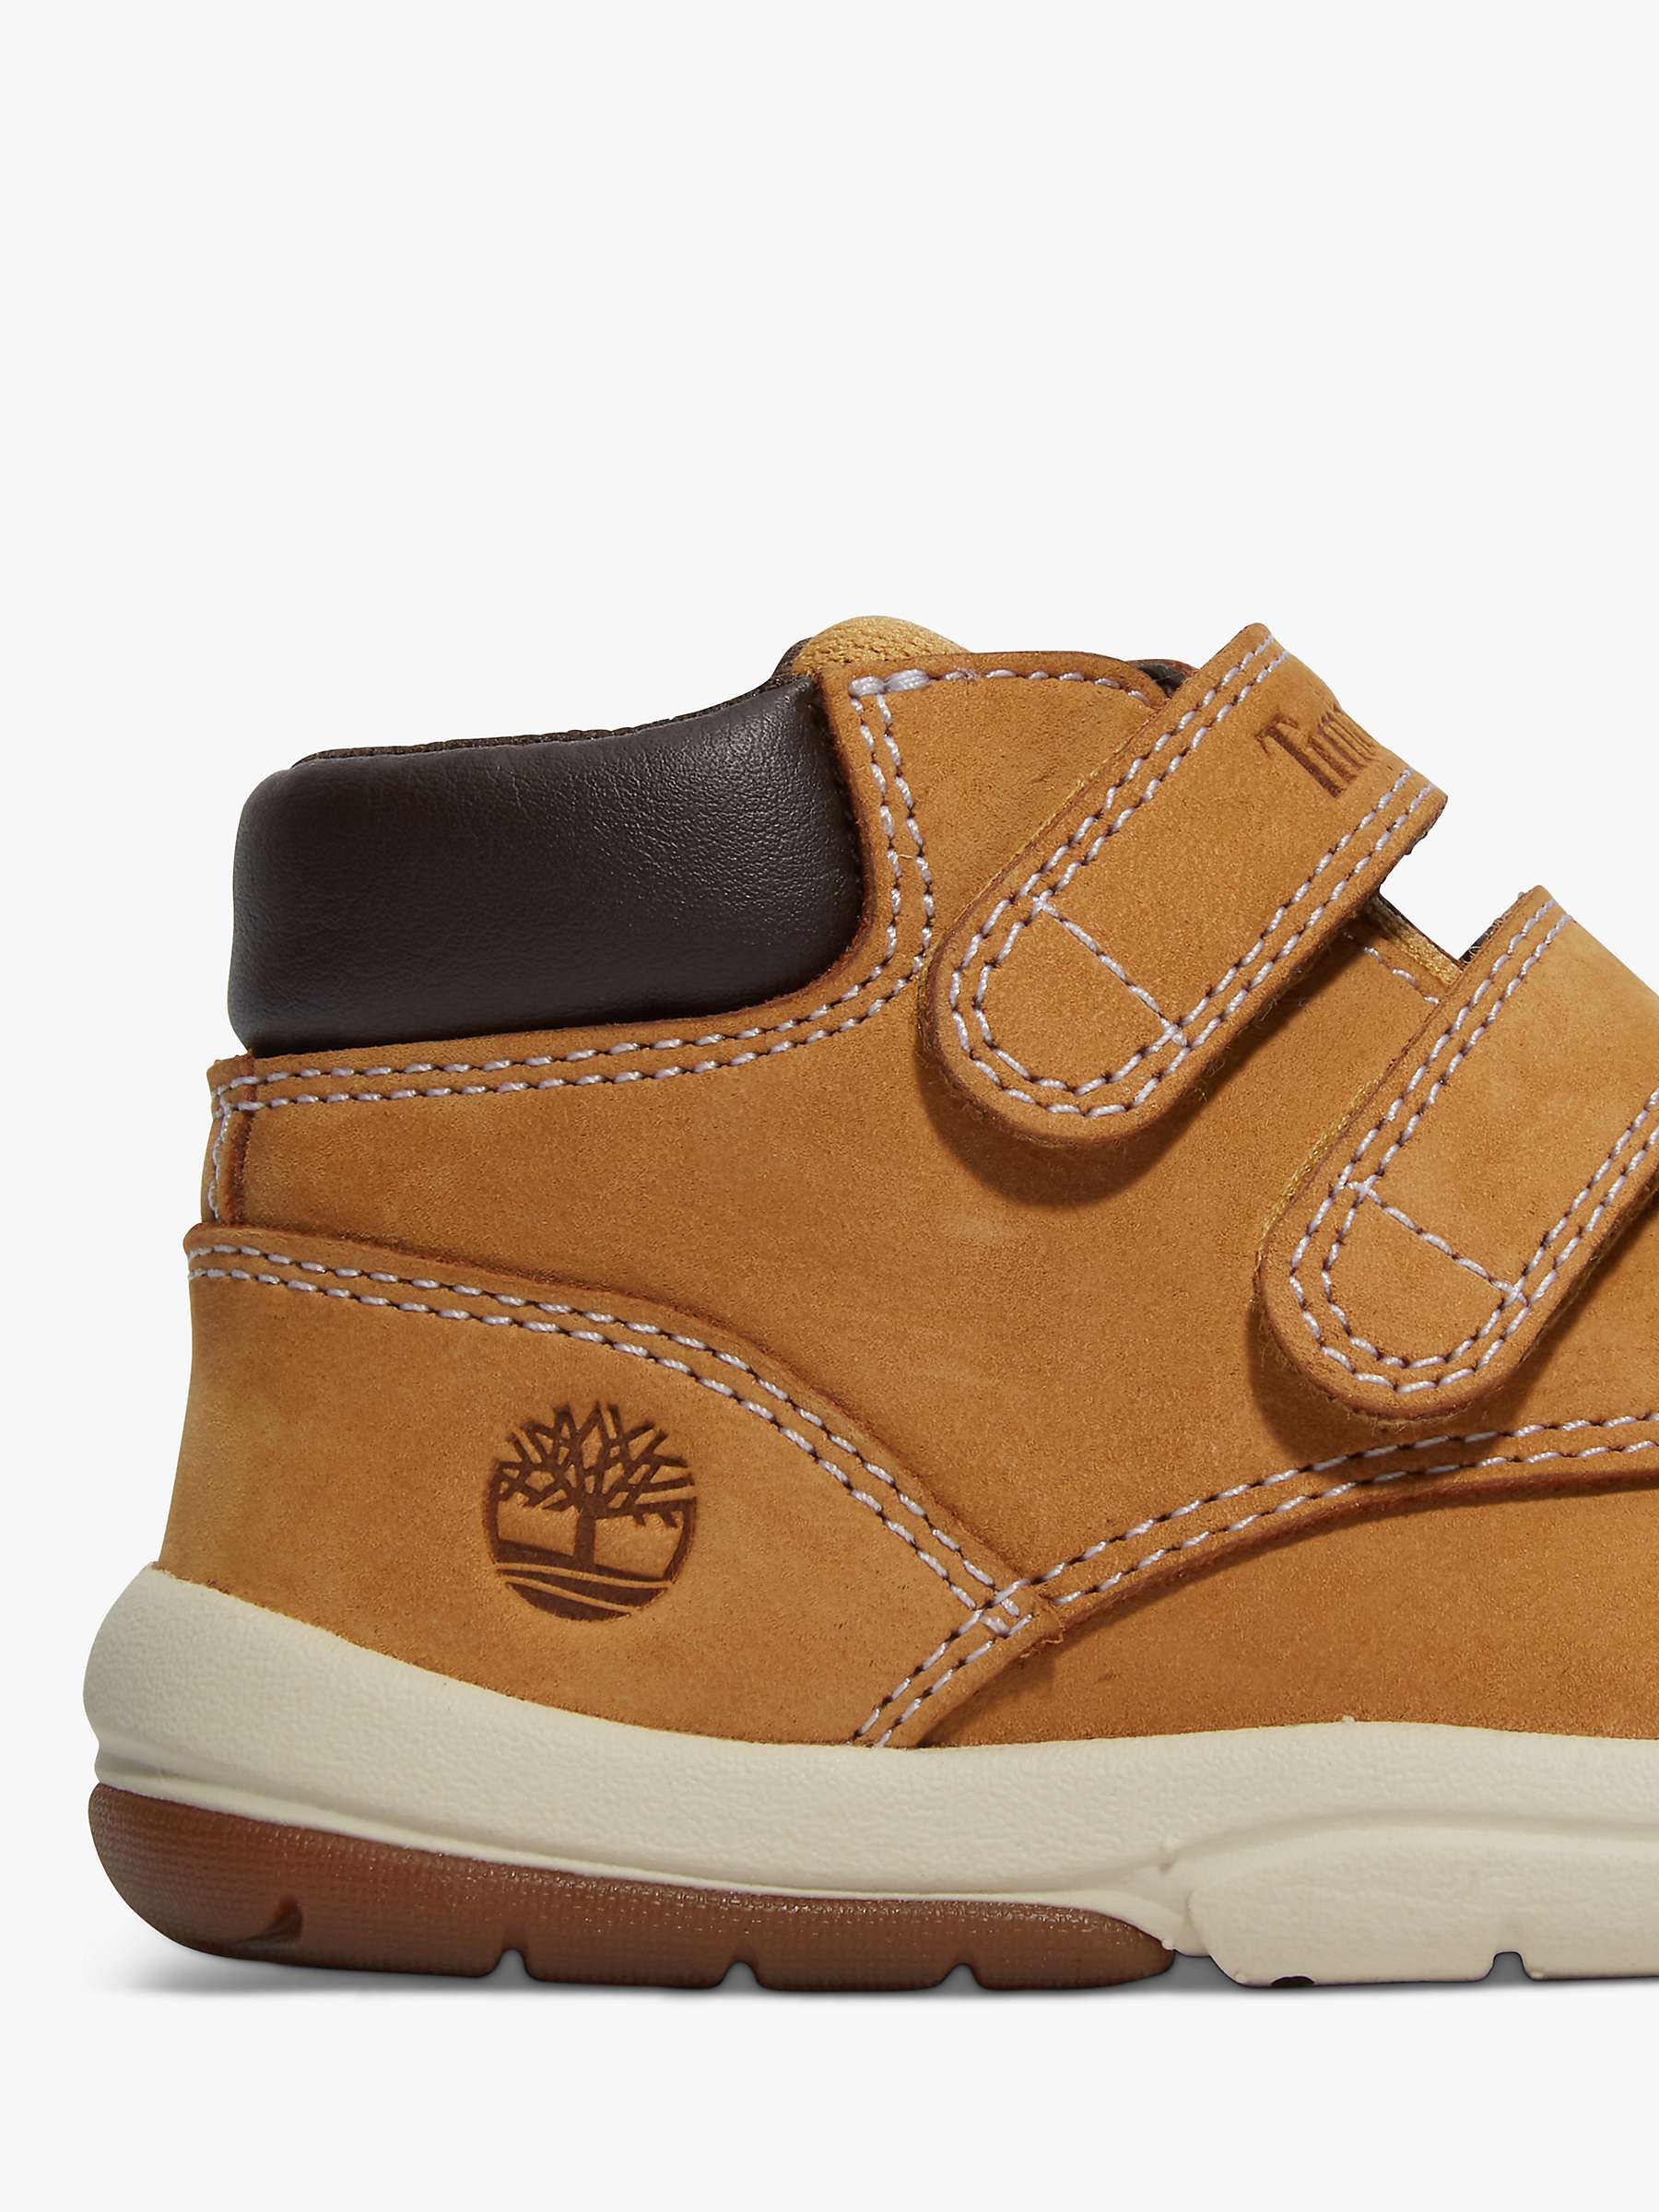 Buy Timberland Kids' Toddle Tracks High Top Trainers Online at johnlewis.com